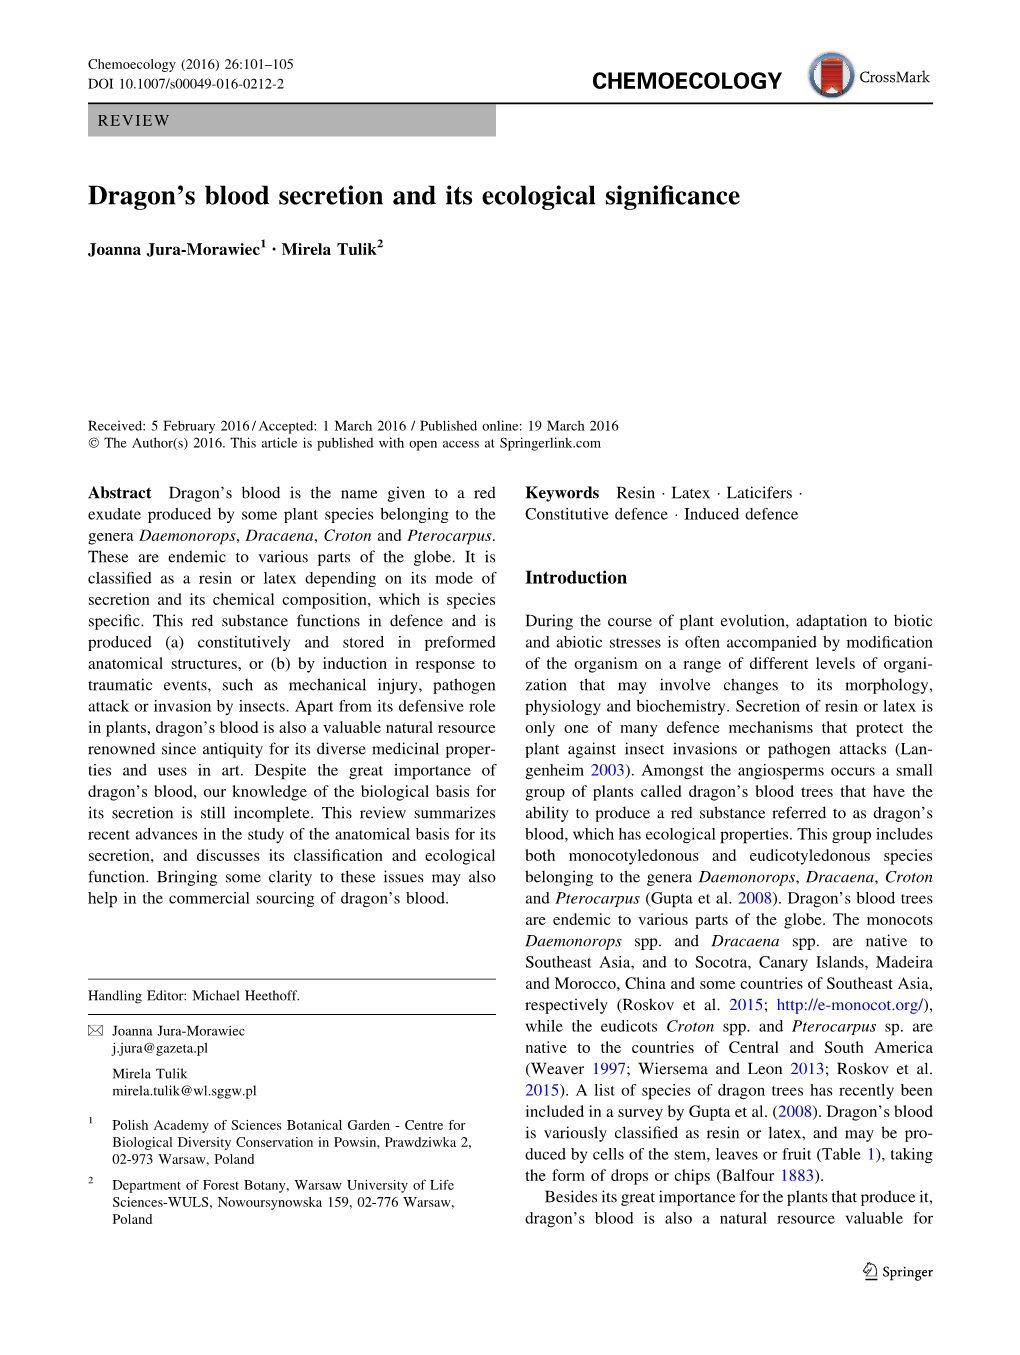 Dragon's Blood Secretion and Its Ecological Significance